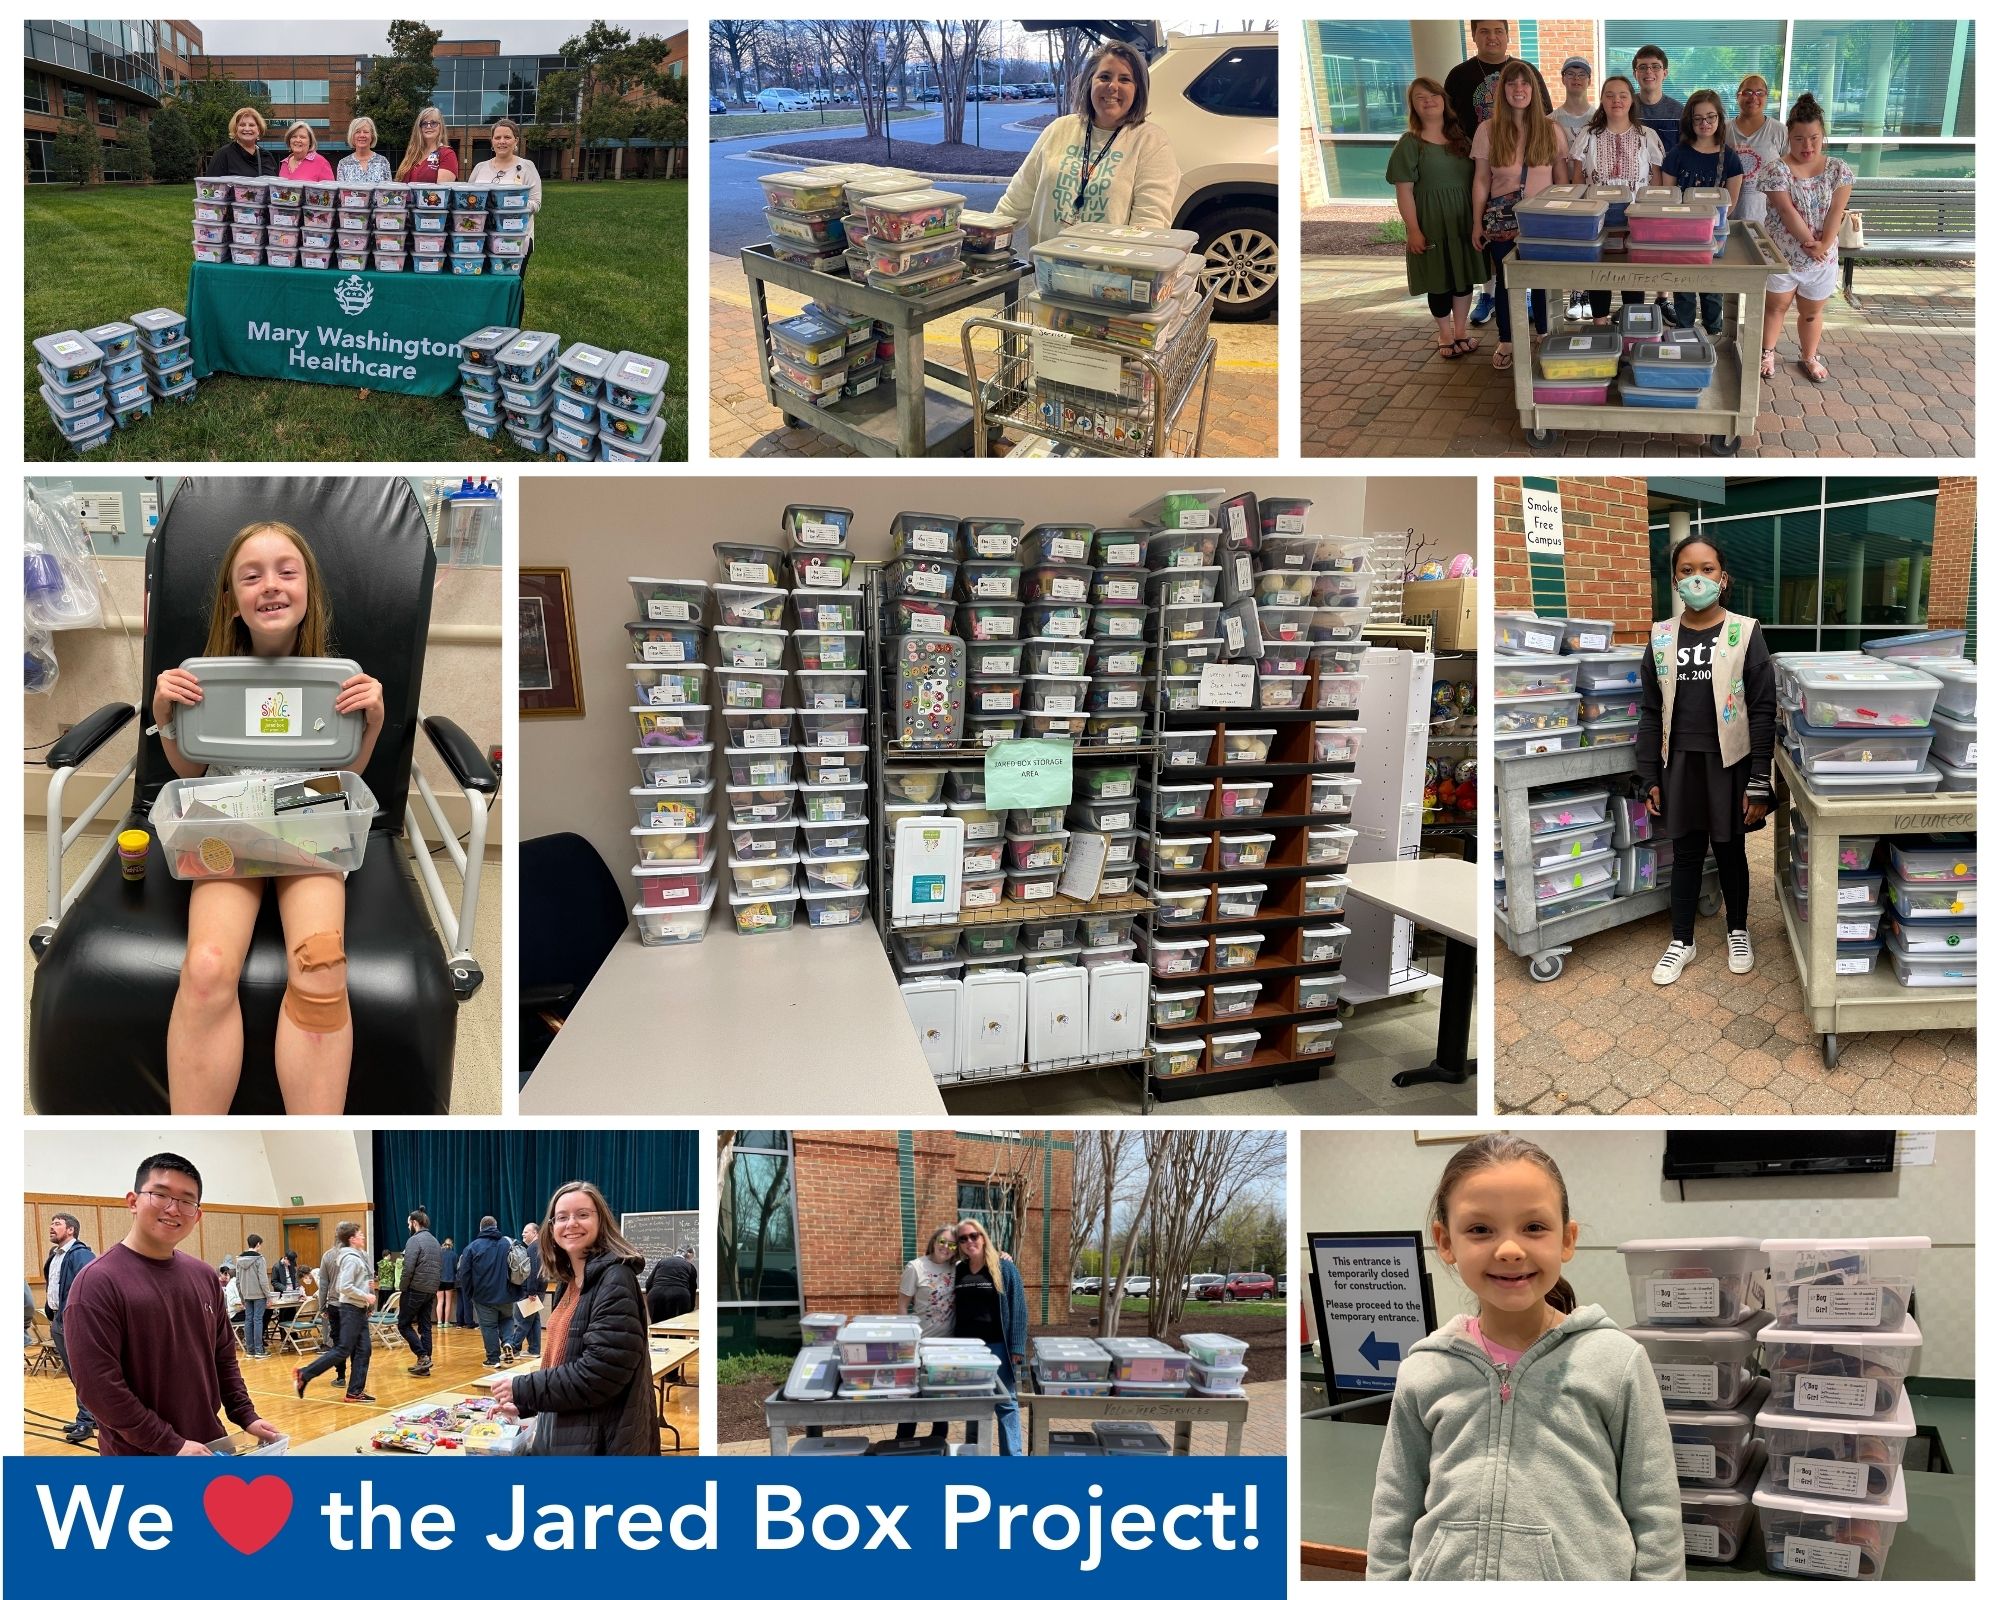 Jared boxes